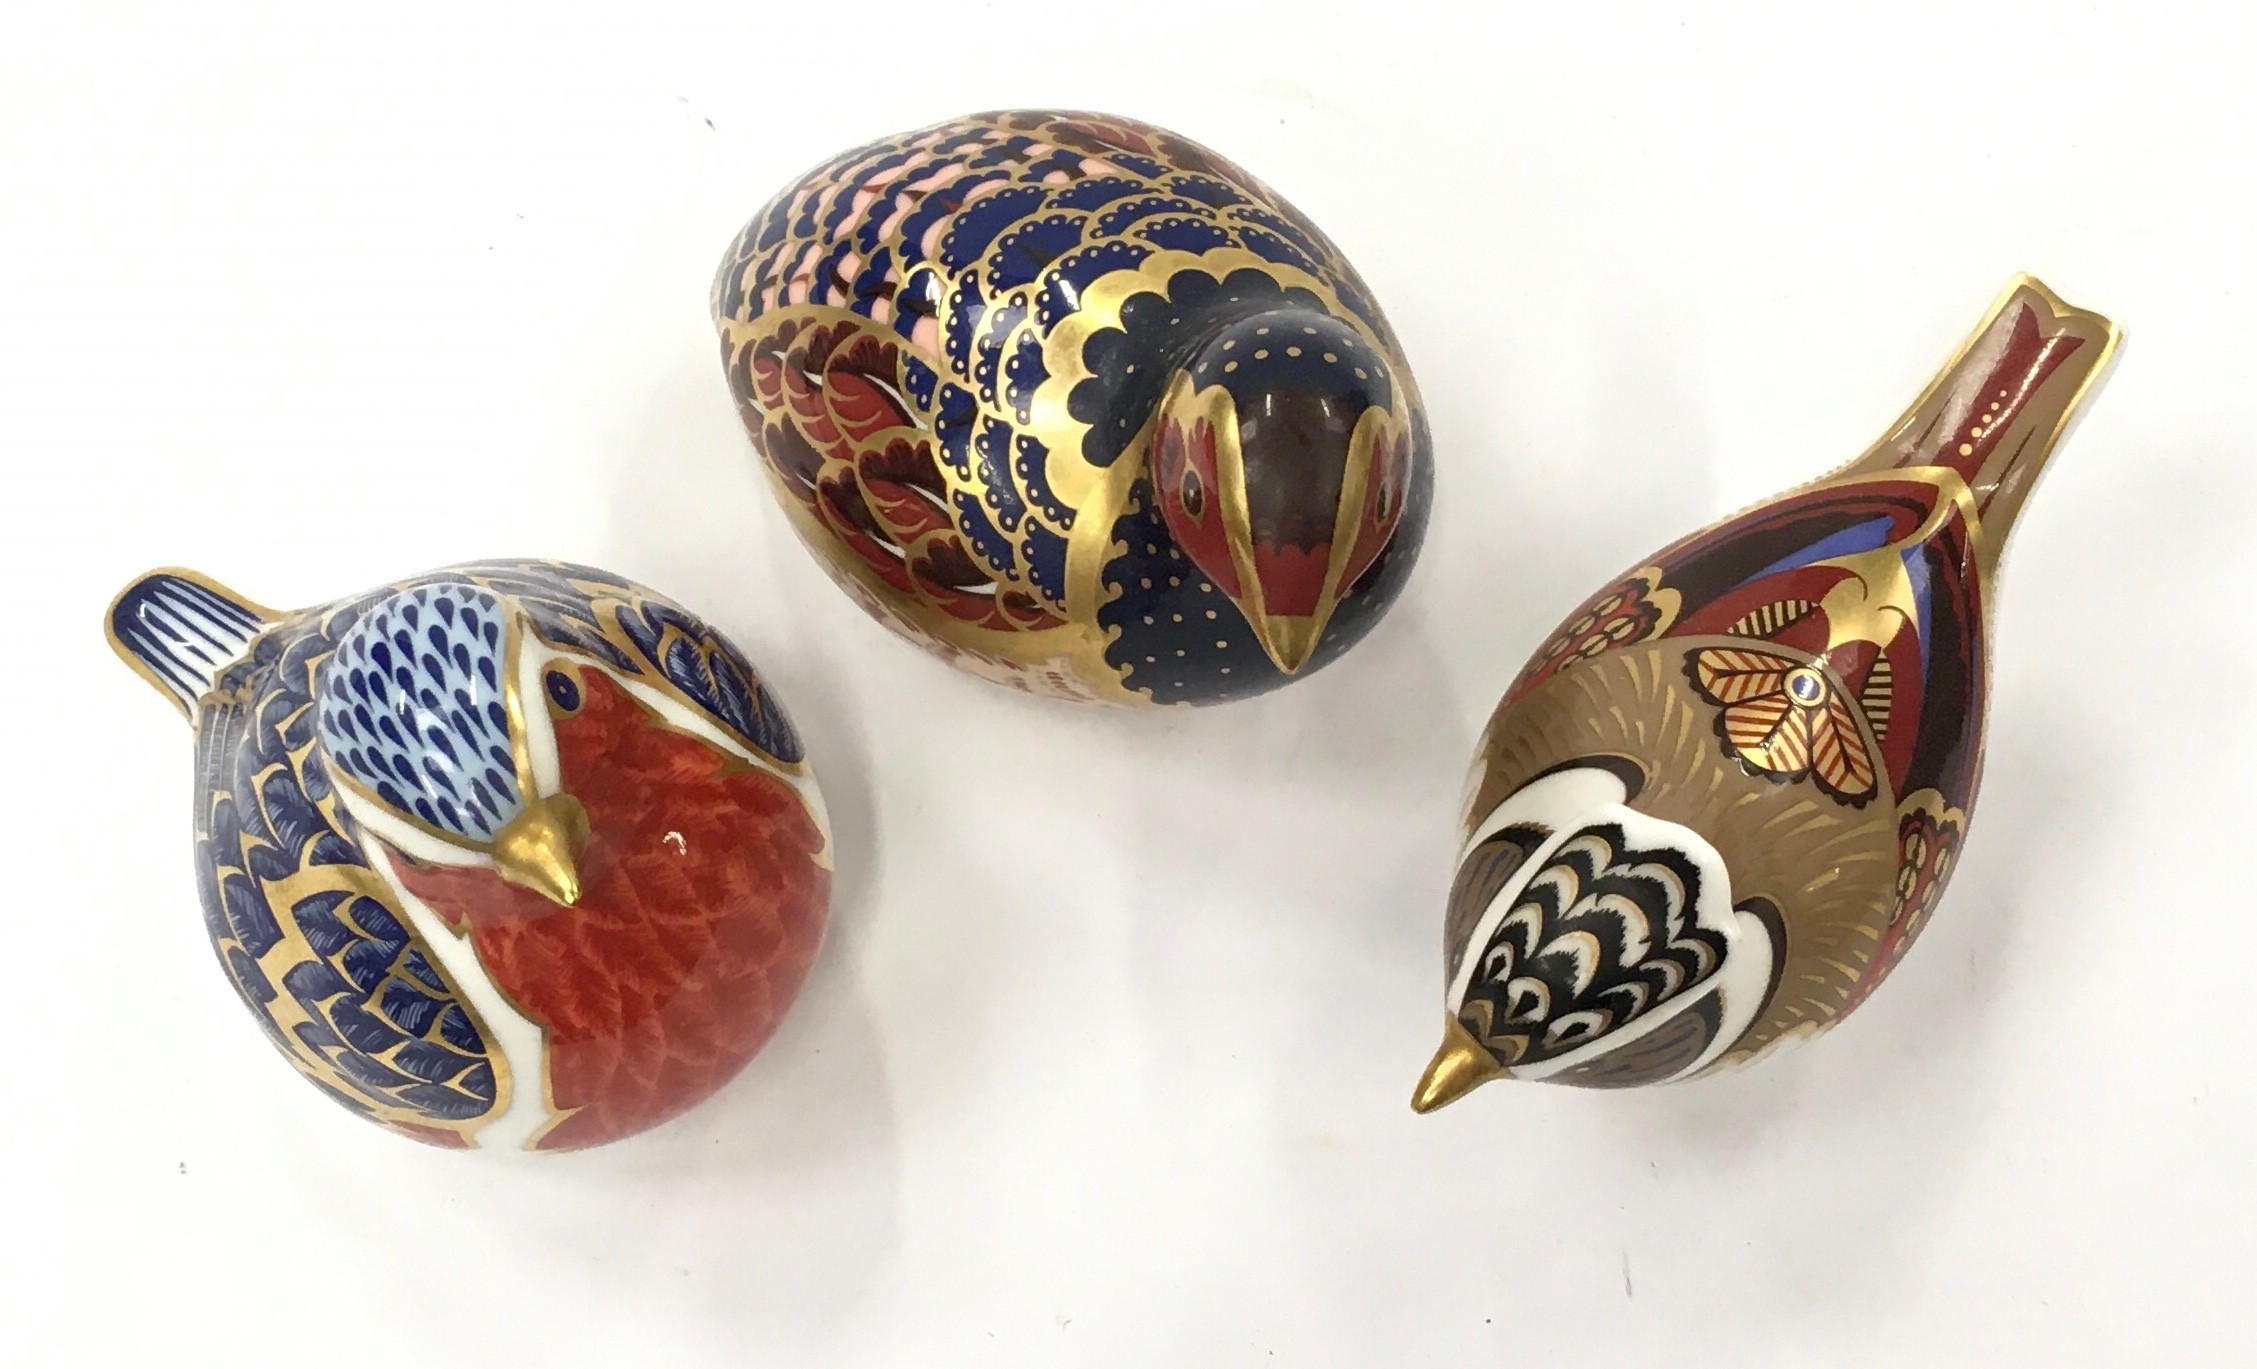 Royal crown Derby collection of bird paperweights (3). - Image 2 of 4